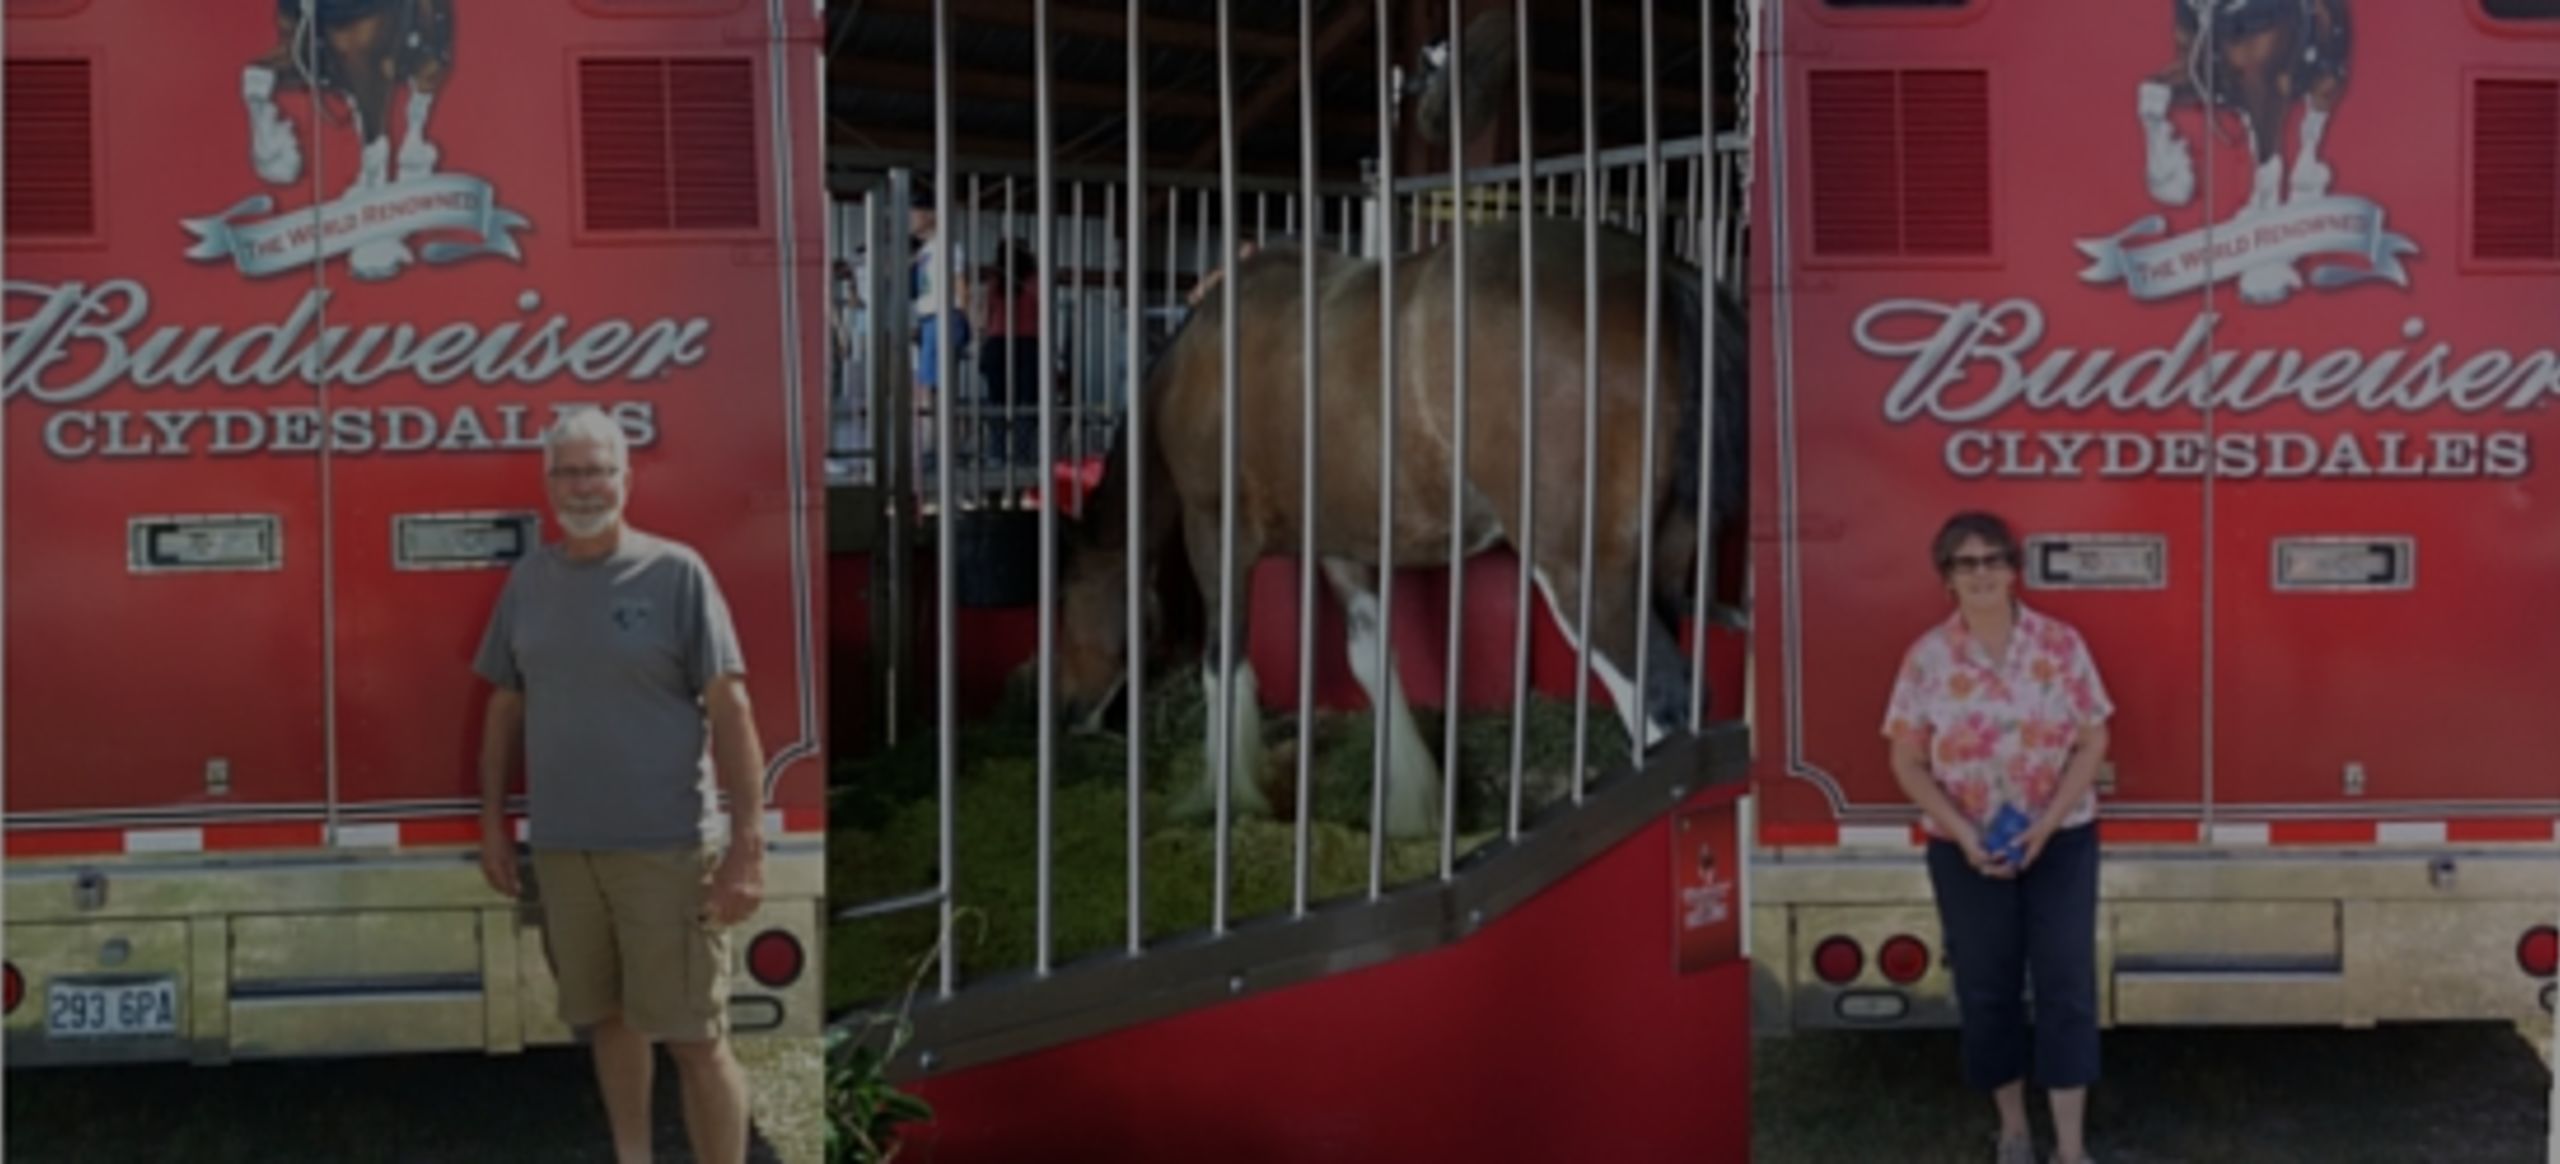 Clydesdales Visit the Midcoast